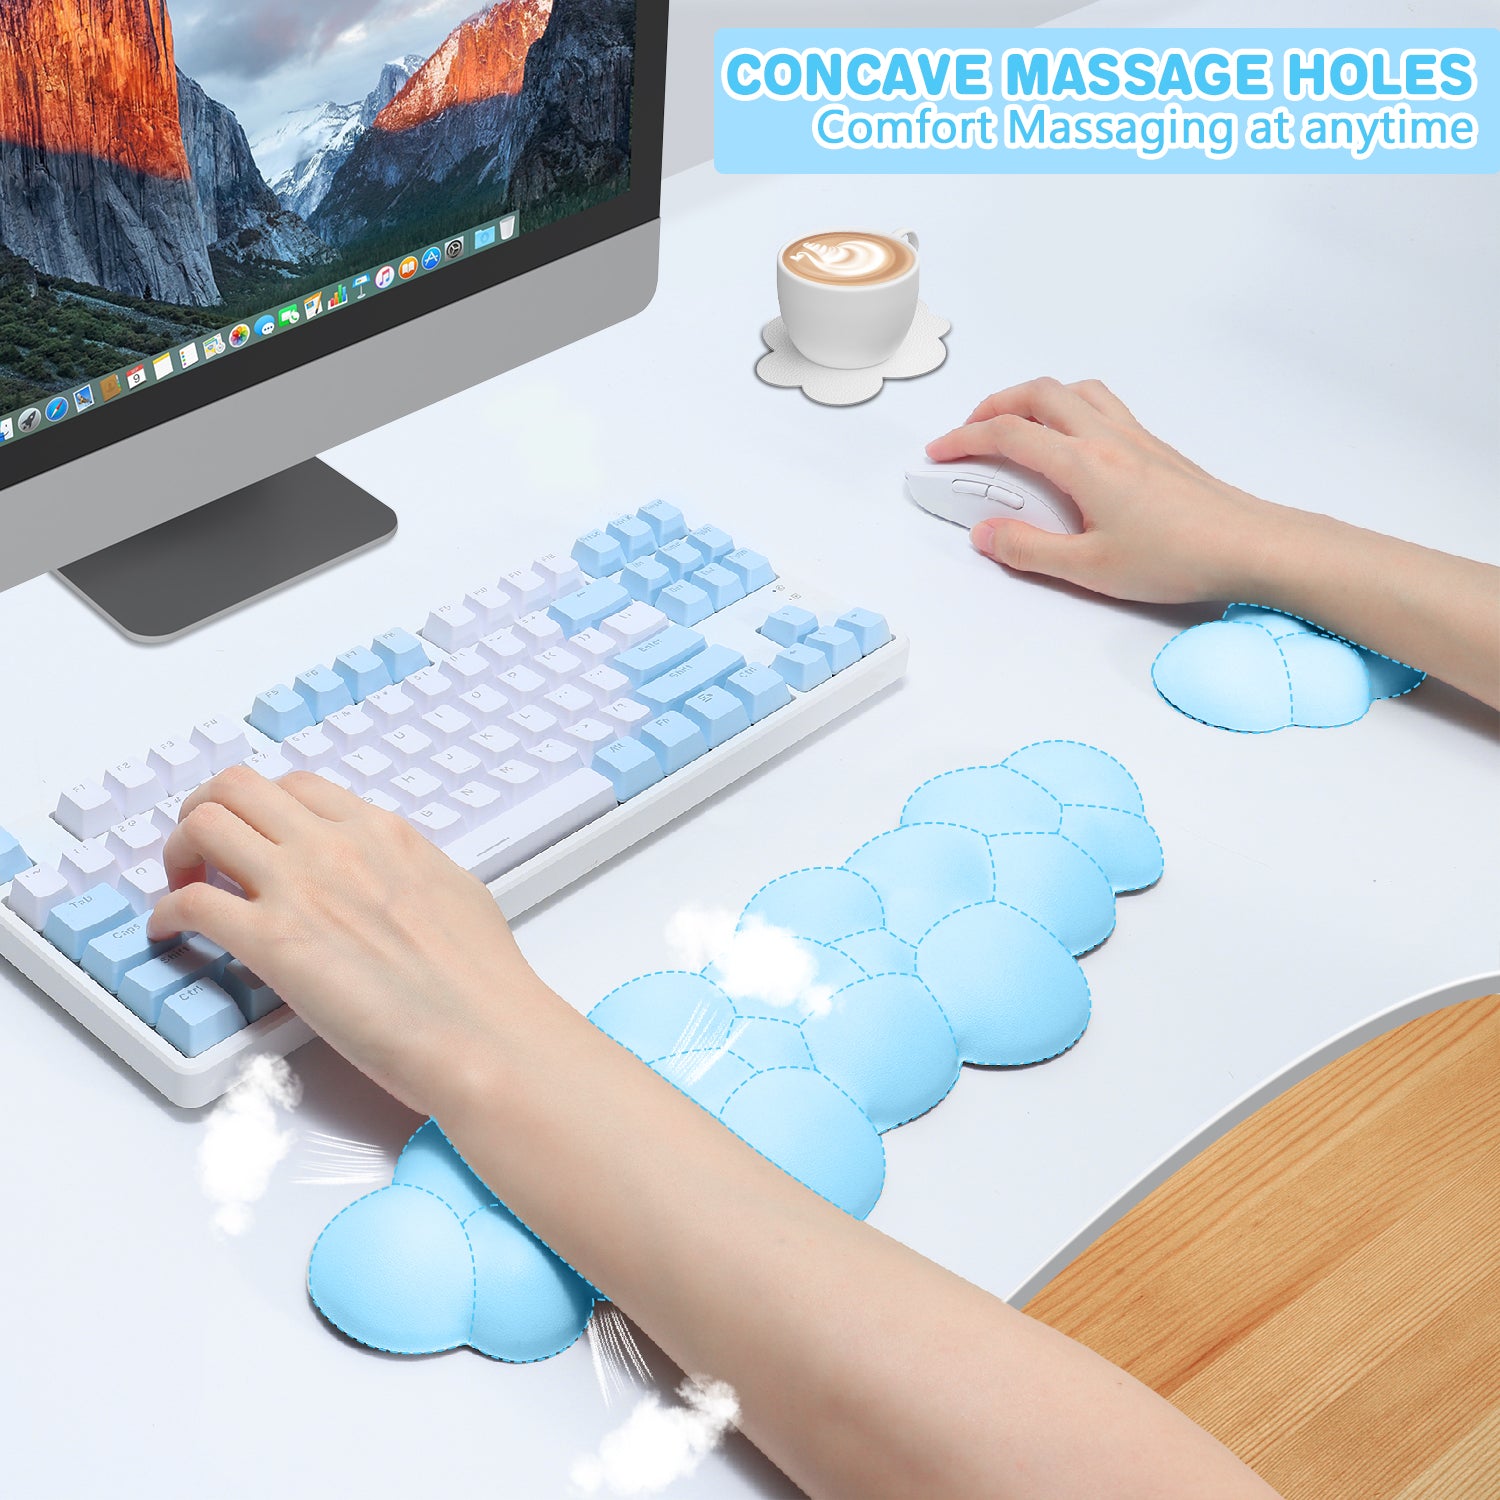 MAMBASNAKE Cloud Keyboard Mouse Wrist Rest with Coaster Set,Ergonomic Palm Rest Combo for for Comfortable Typing/Gaming -3 in 1 Set